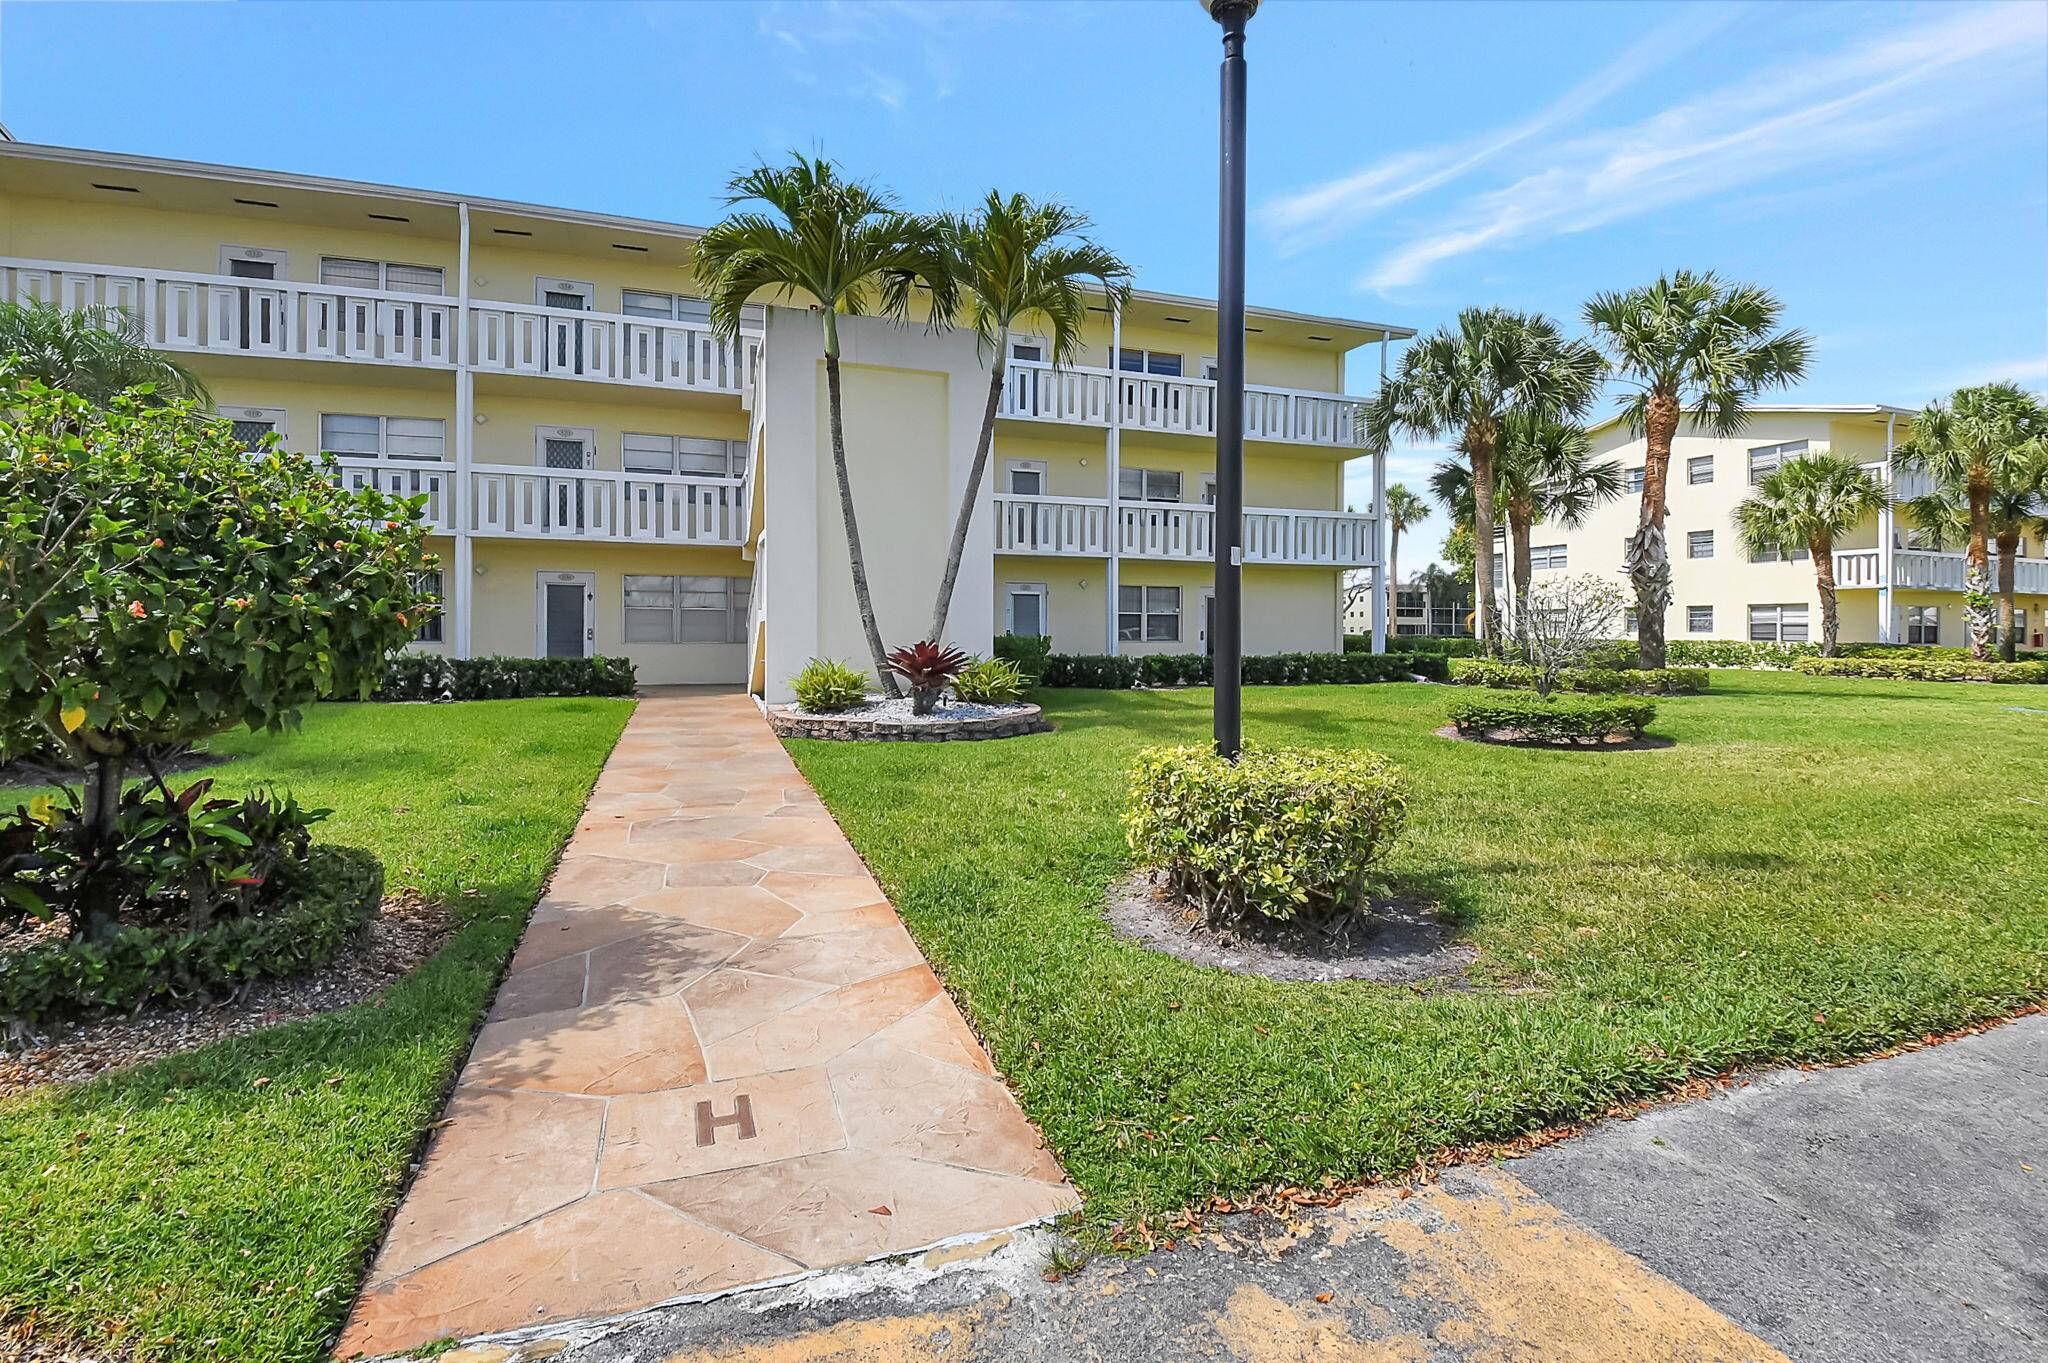 Relax, Unwind, and Settle in this quaint waterfront Condo located in Century Village West Boca Raton, 55.